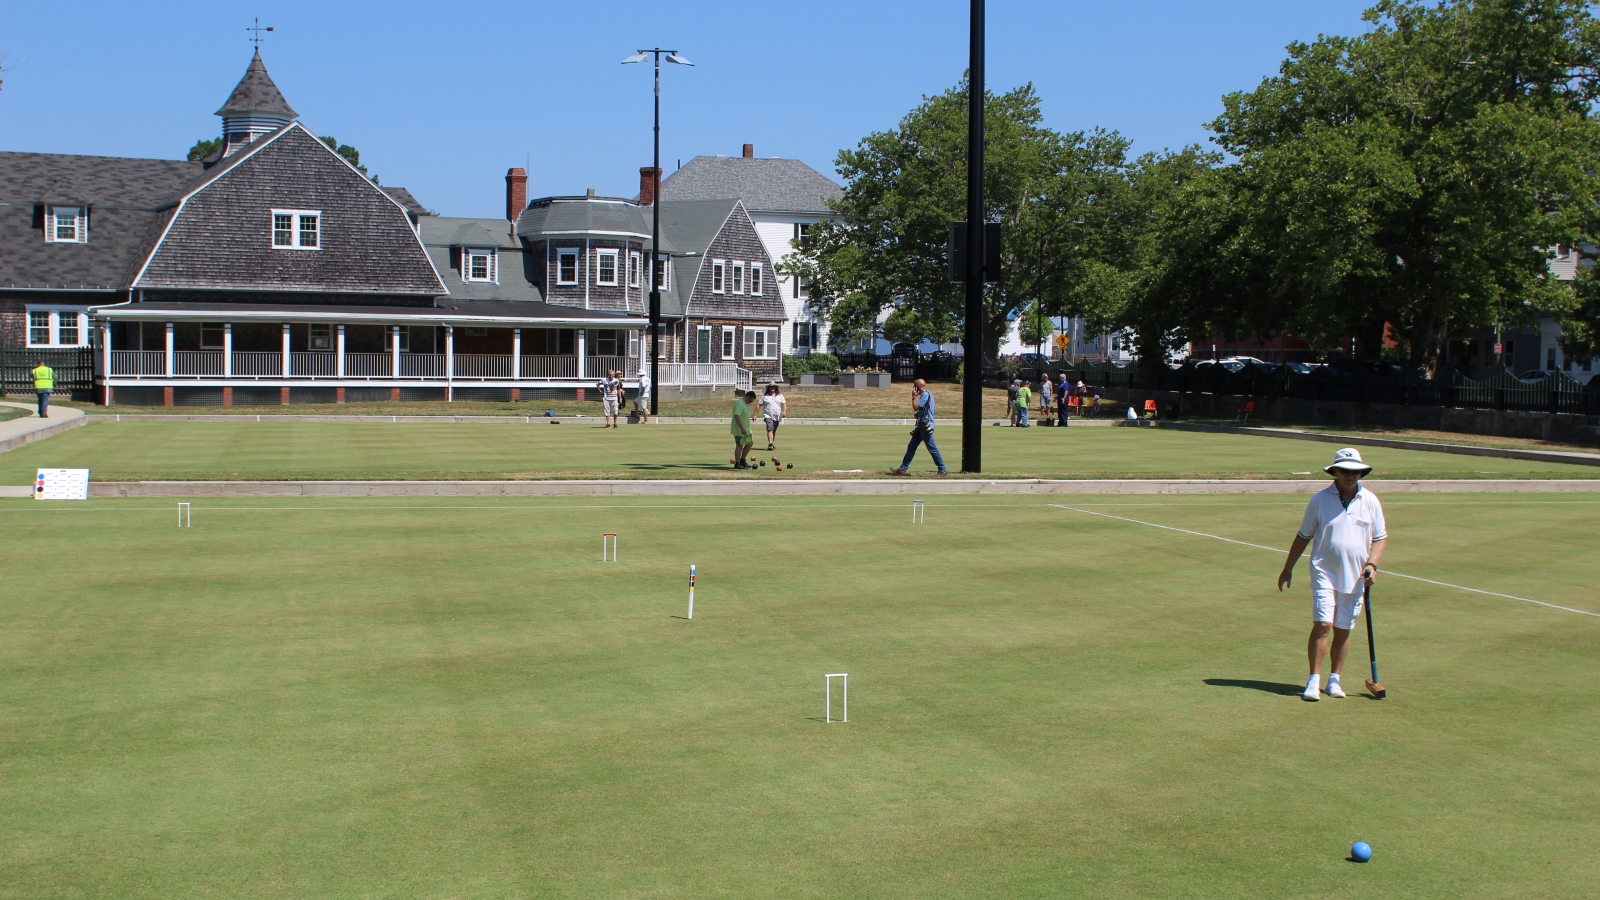 The newly restored bowling greens at Hazelwood Park.